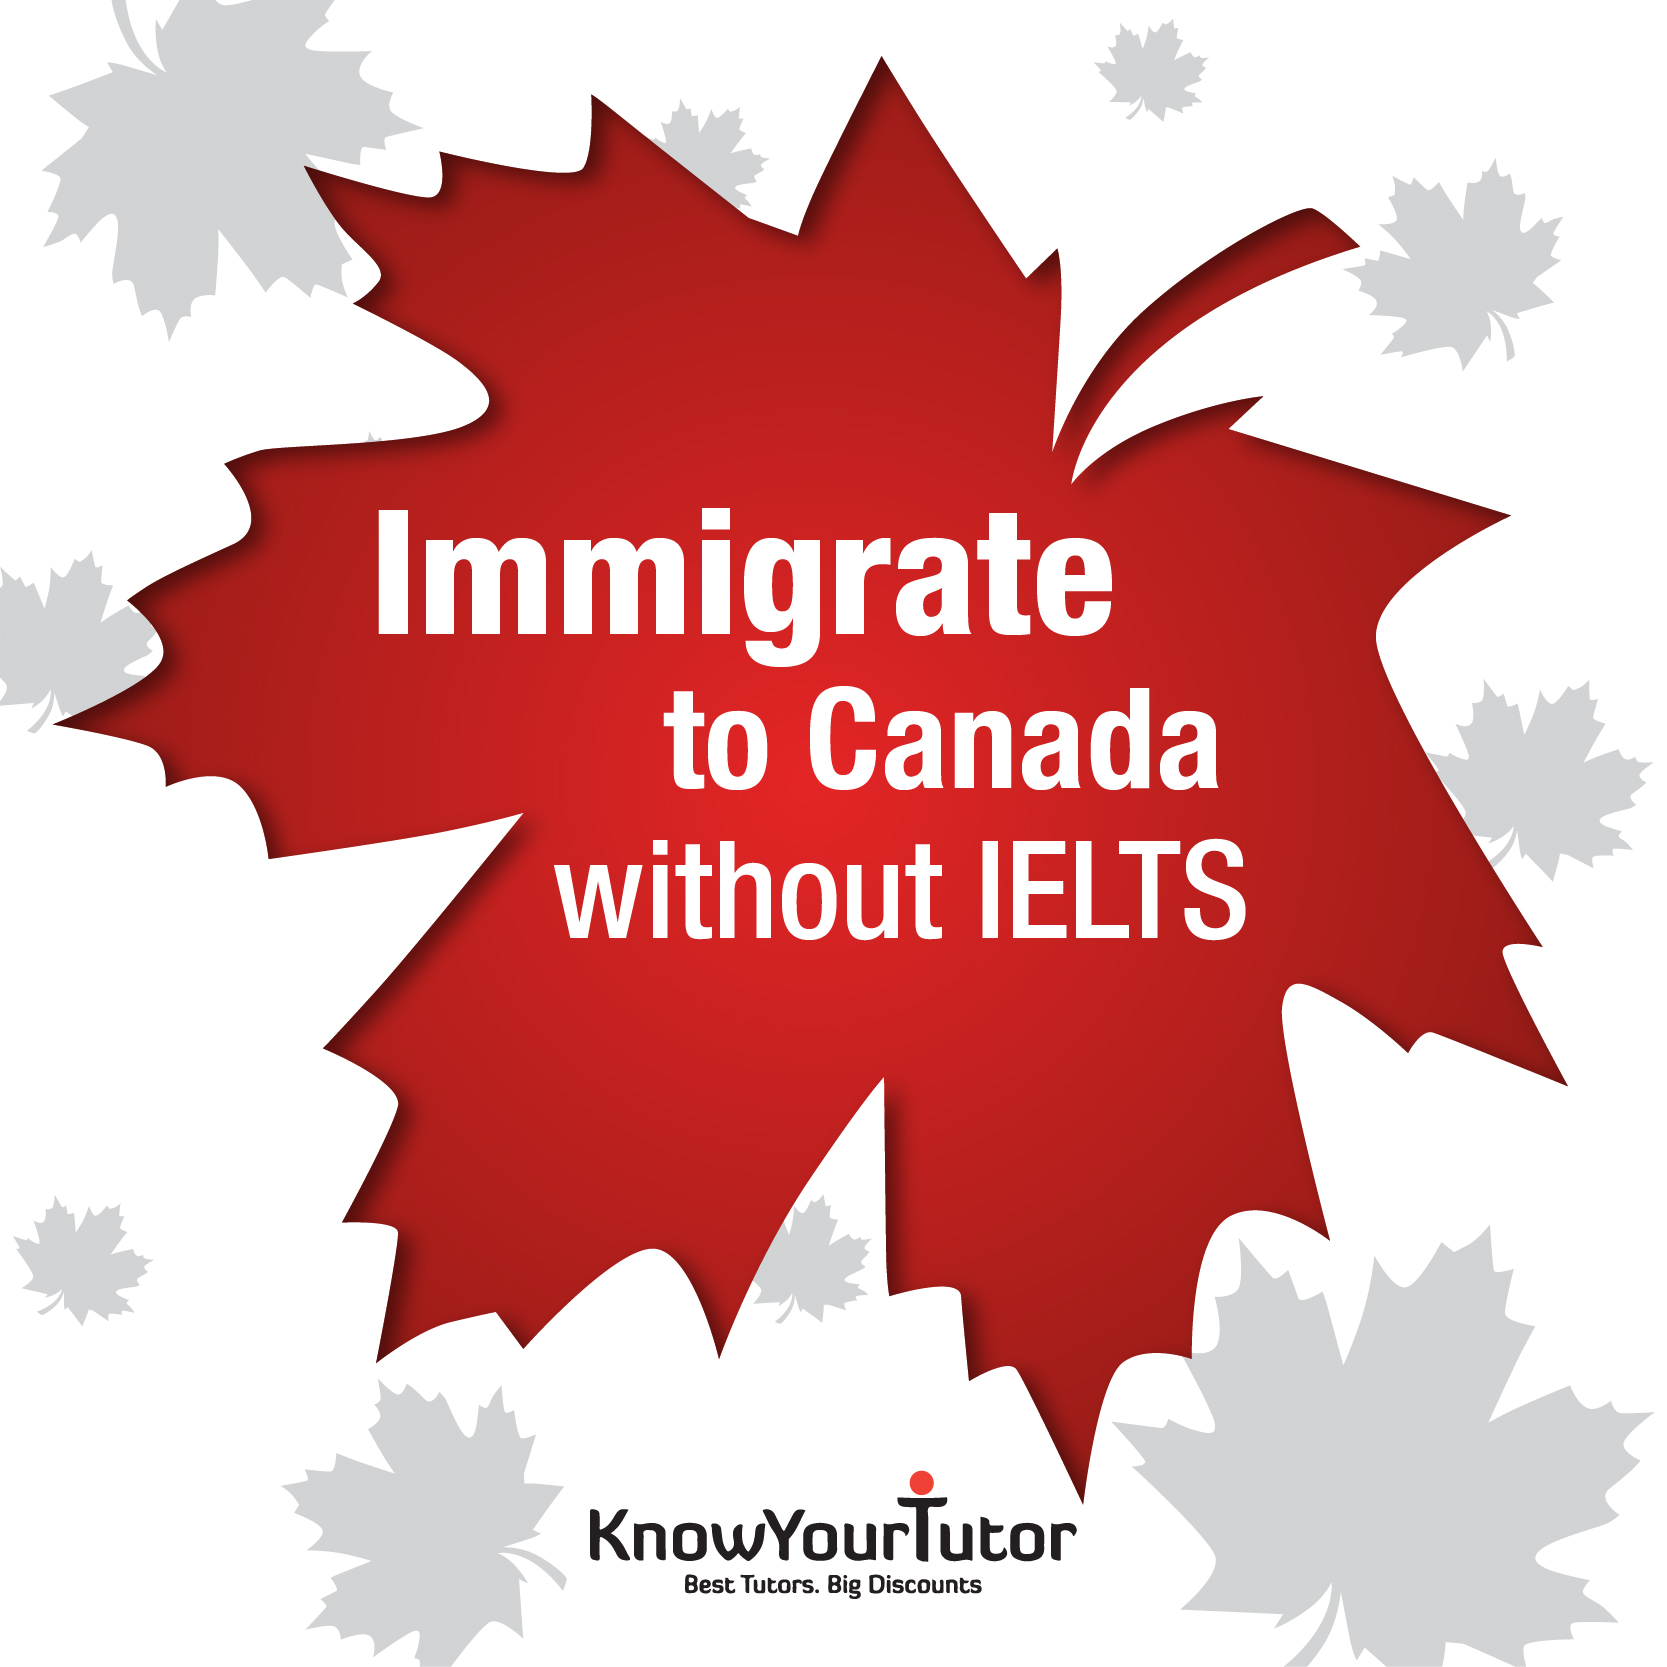 Immigrate to Canada without IELTS